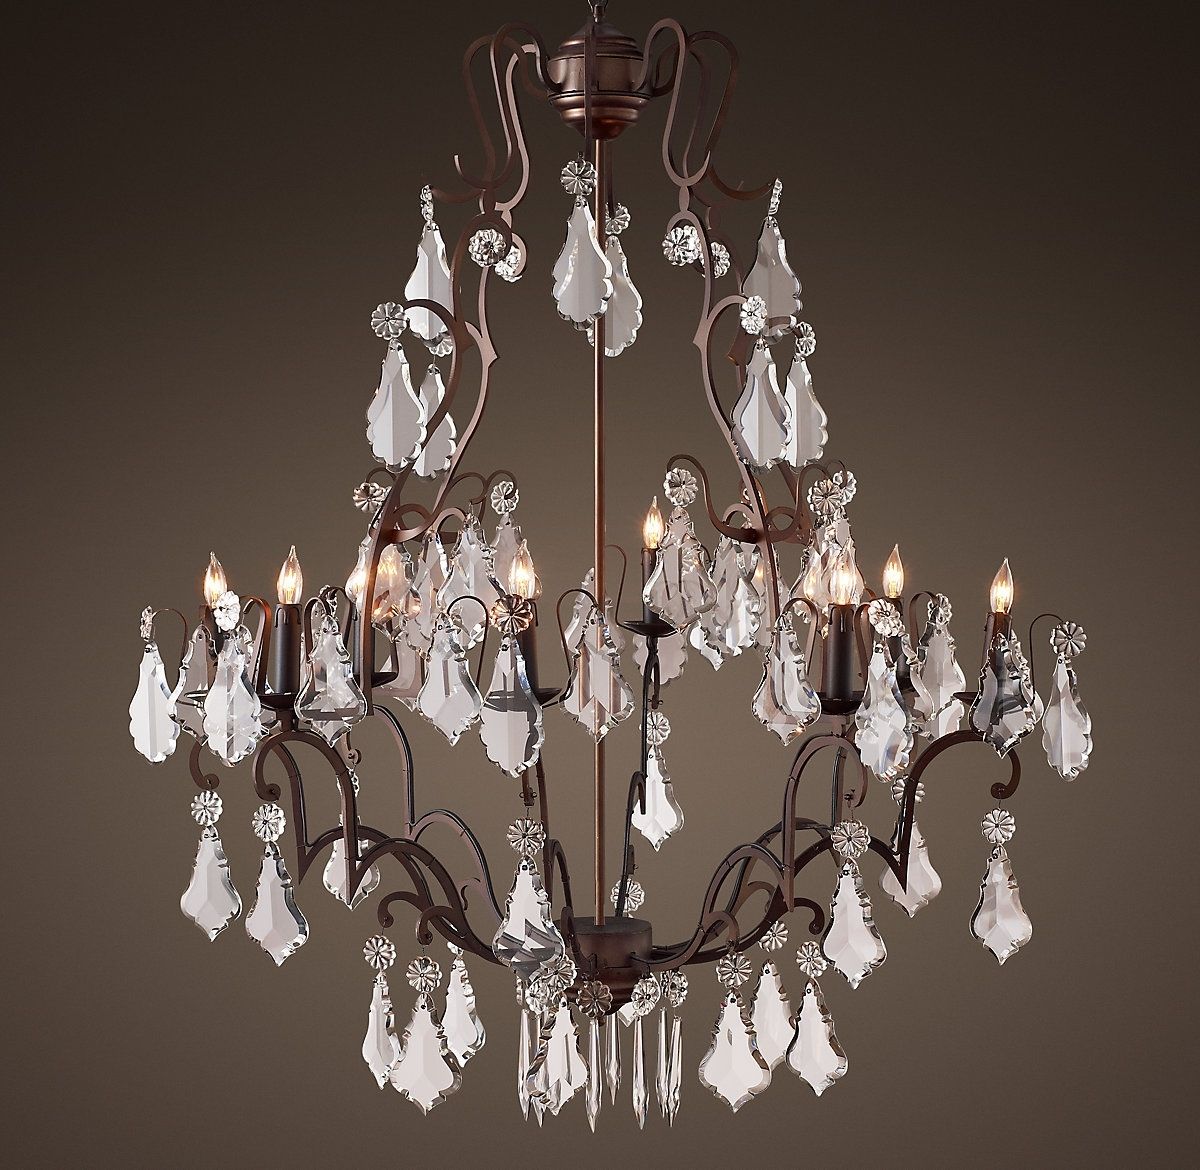 Fashionable Florian Crystal Chandeliers Pertaining To Florian Crystal Chandelier 40"】美国 价格 图片 掌案 (View 9 of 15)